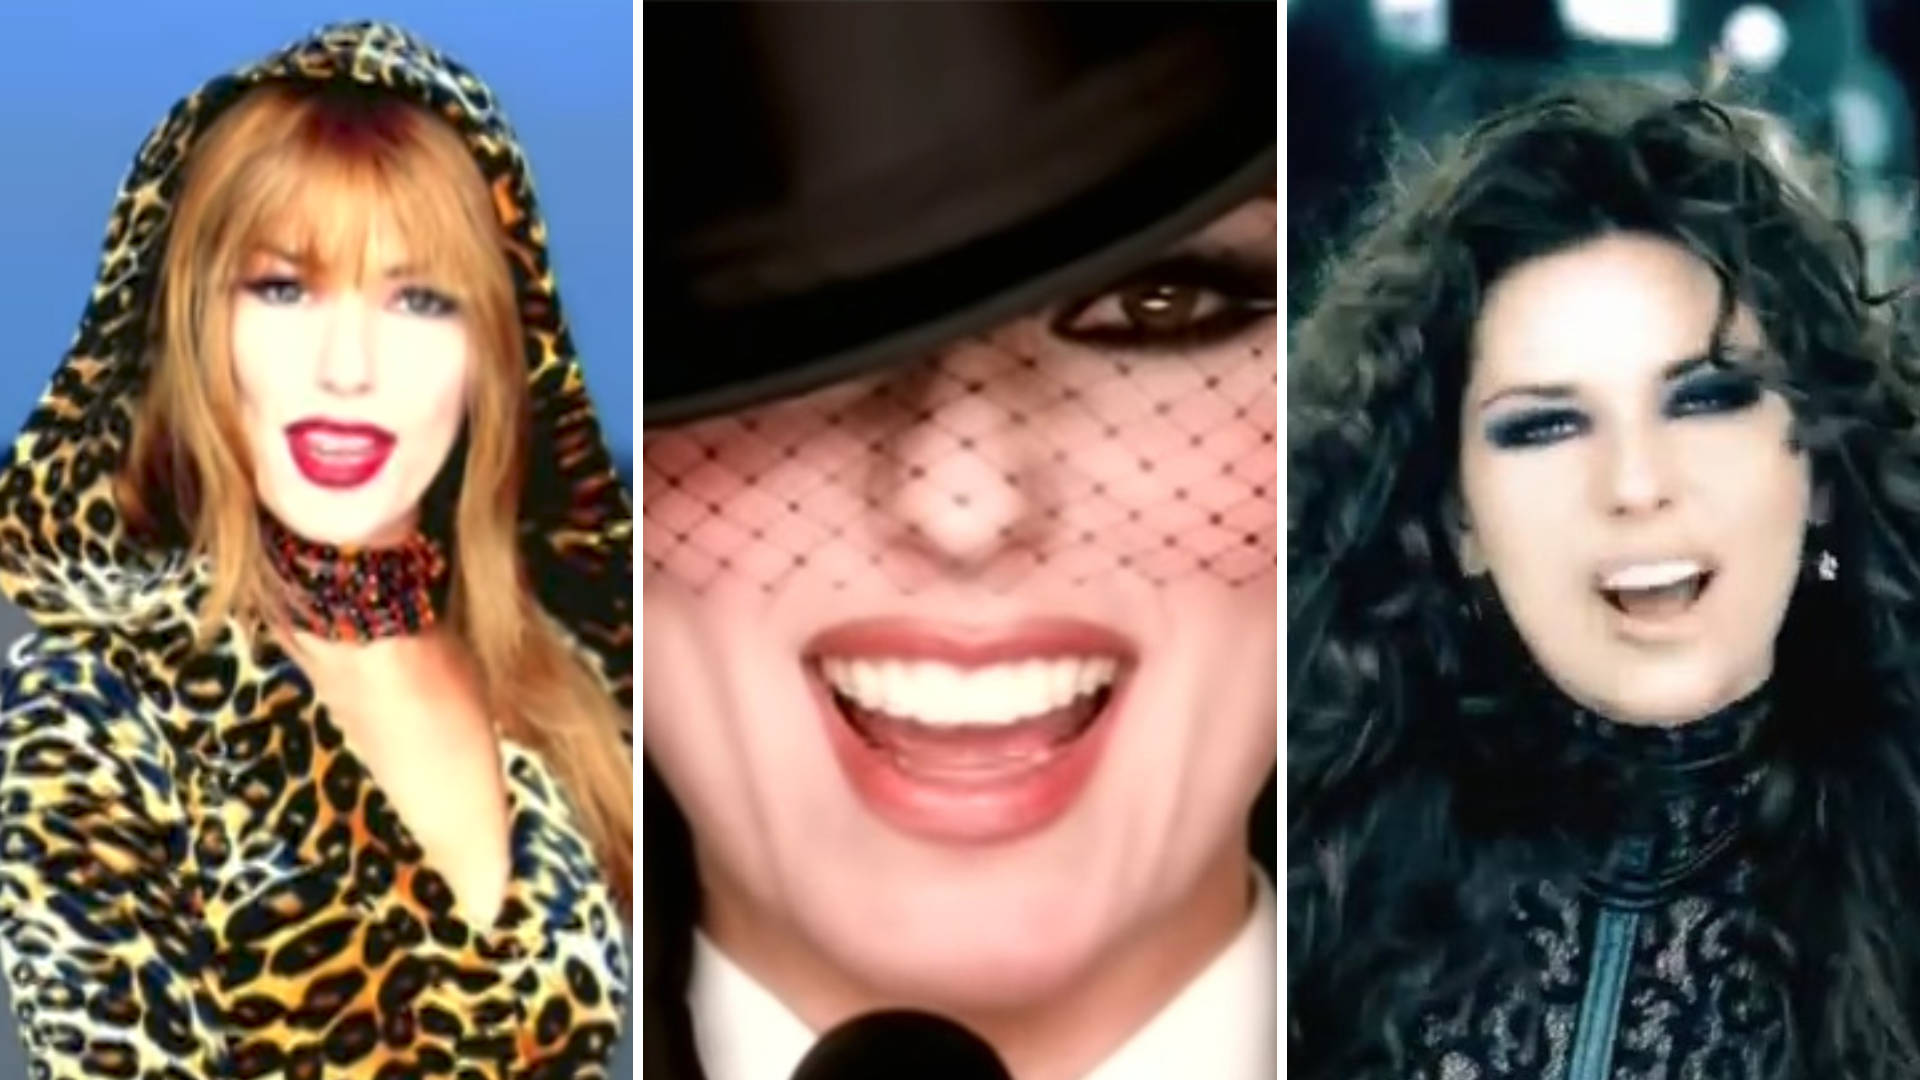 Shania Twain's 10 best songs ever, ranked - Smooth